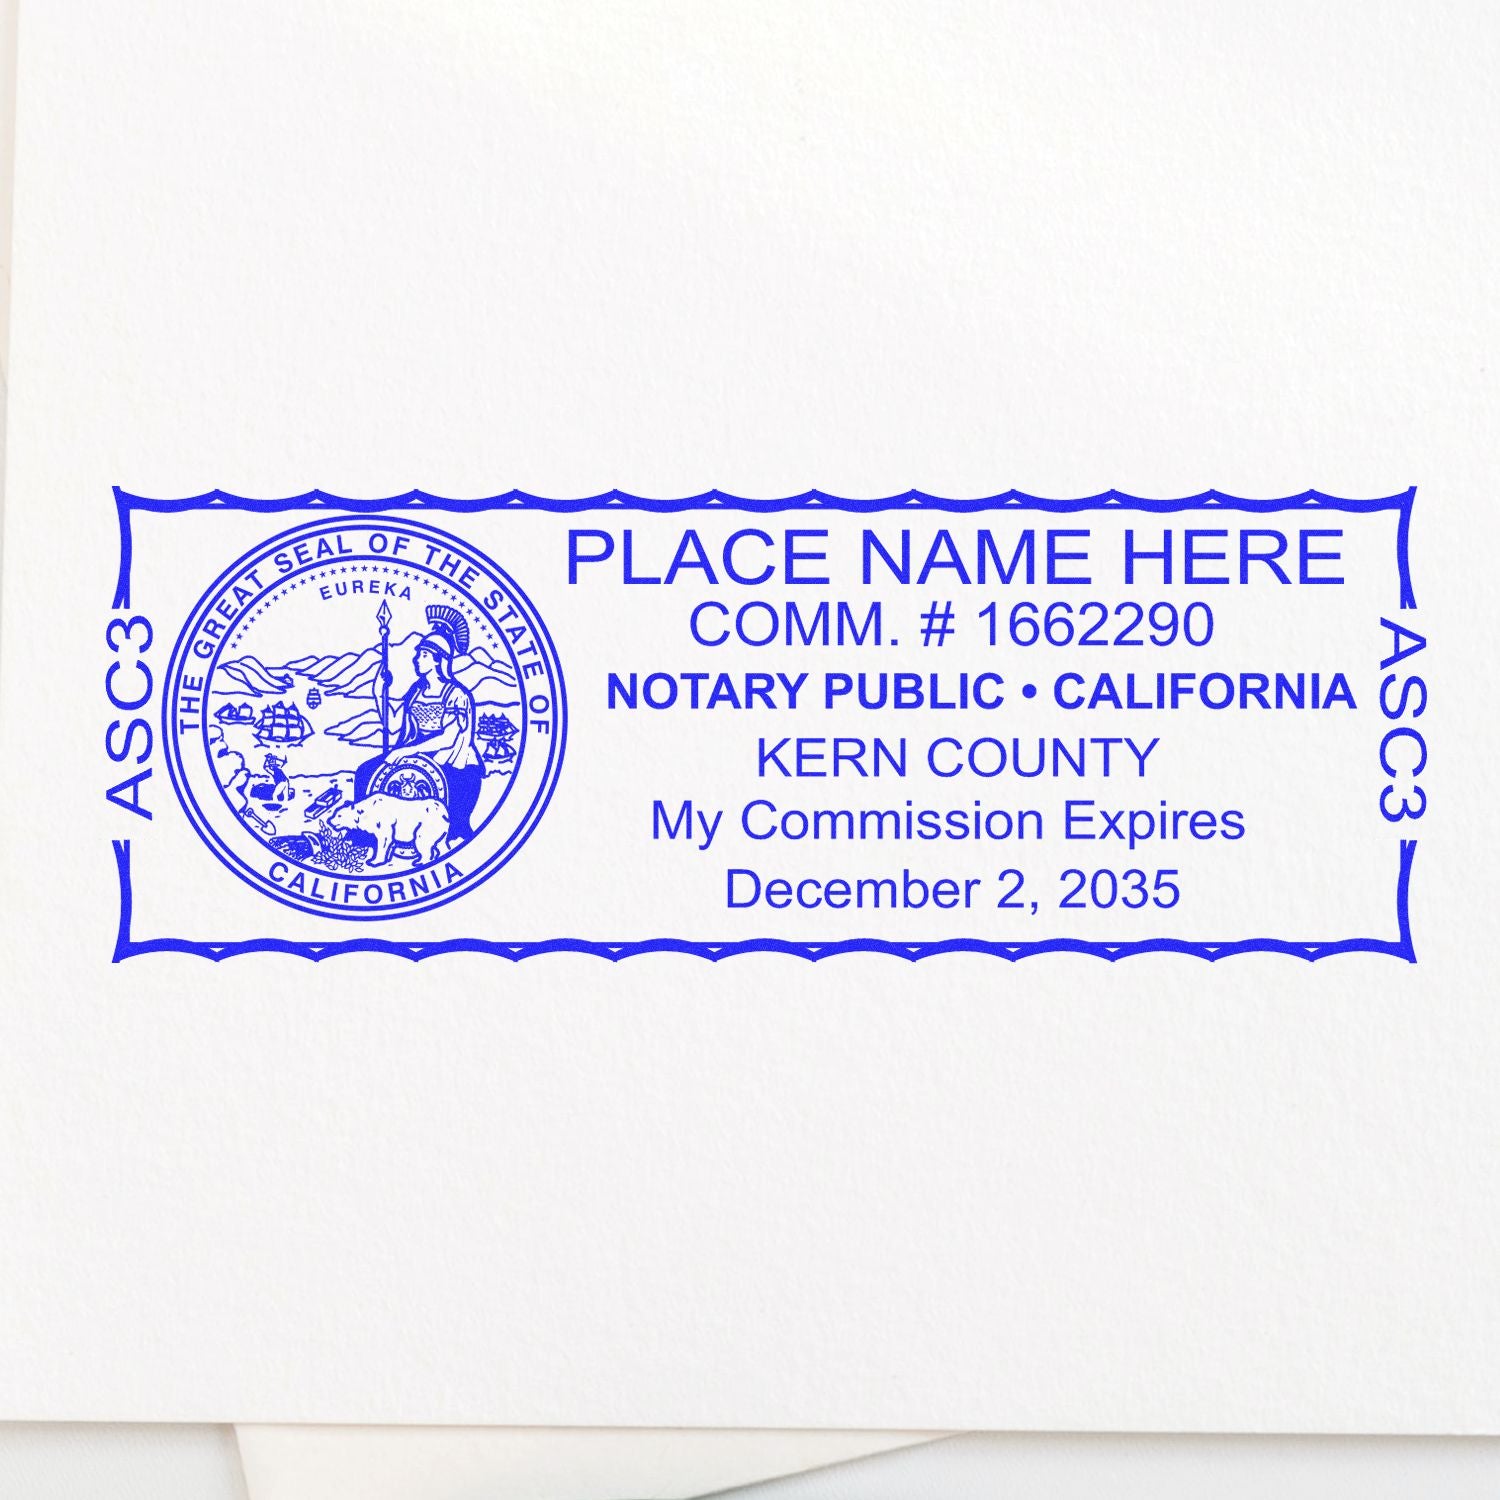 An alternative view of the Super Slim California Notary Public Stamp stamped on a sheet of paper showing the image in use